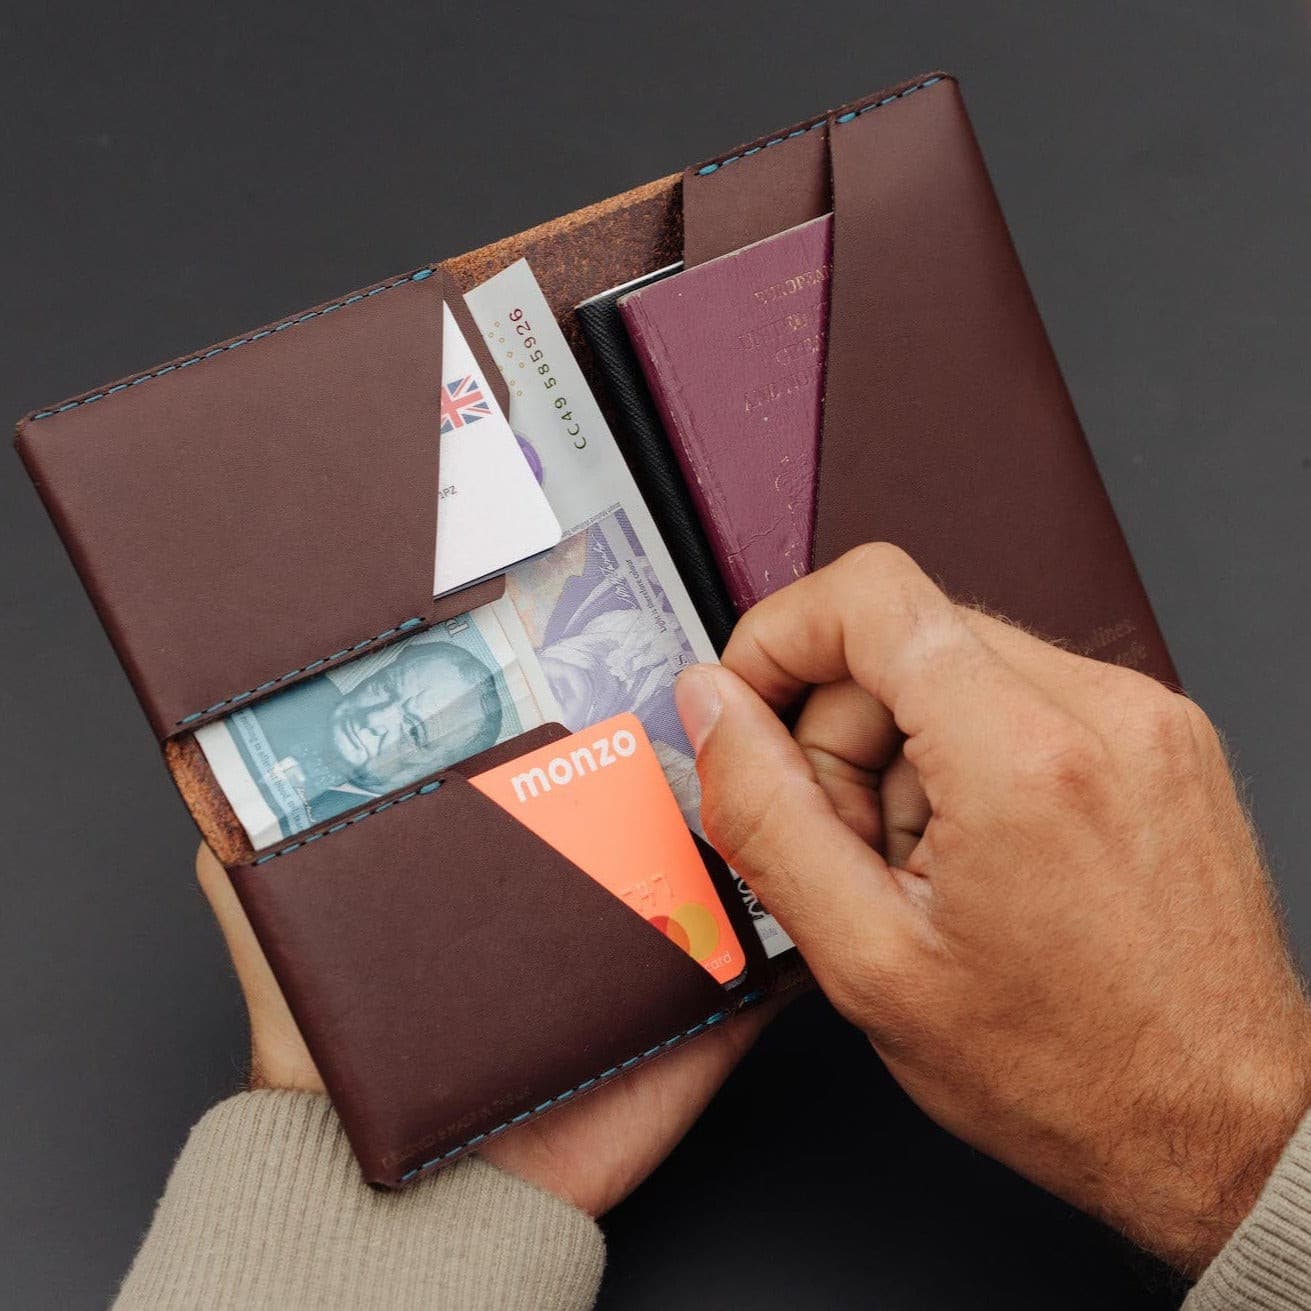 Wingback Wingston Travel Wallet - Storming Gravity